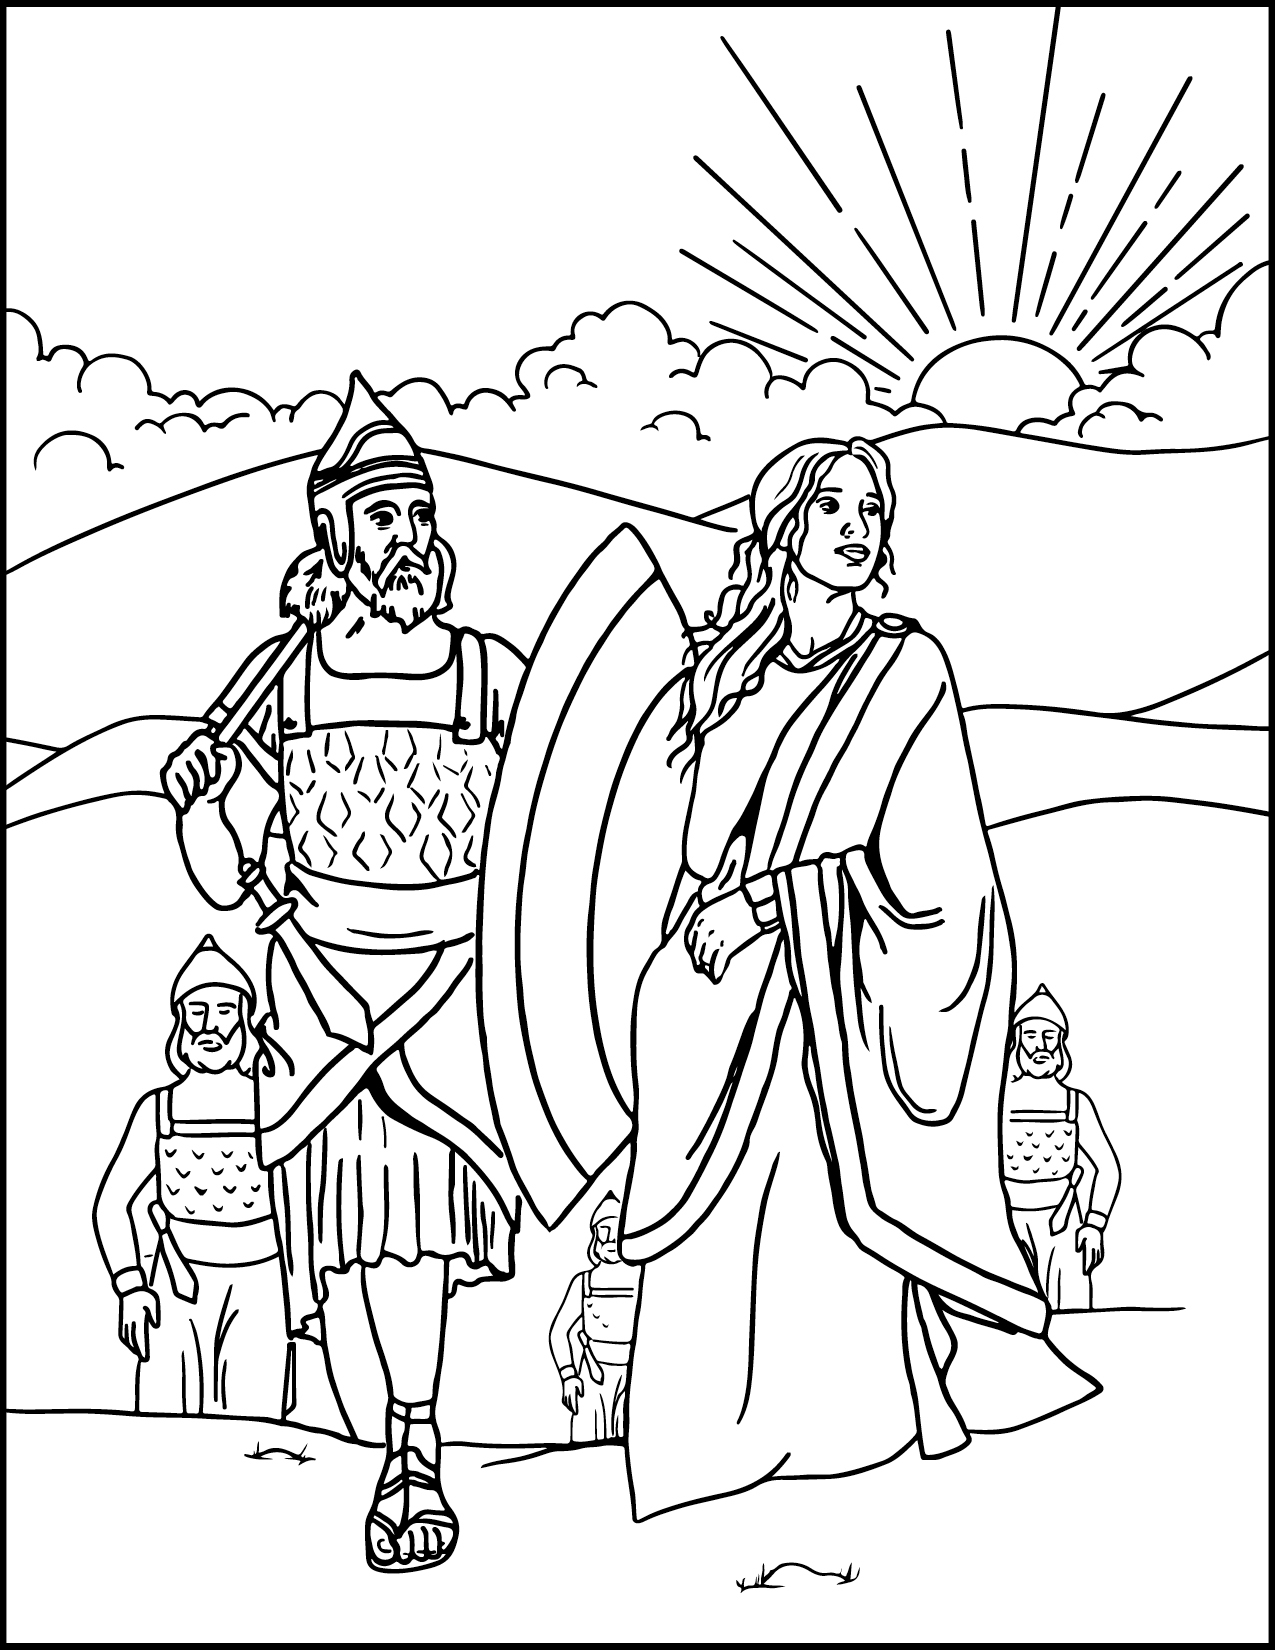 Year a quarter coloring pages starting with jesus